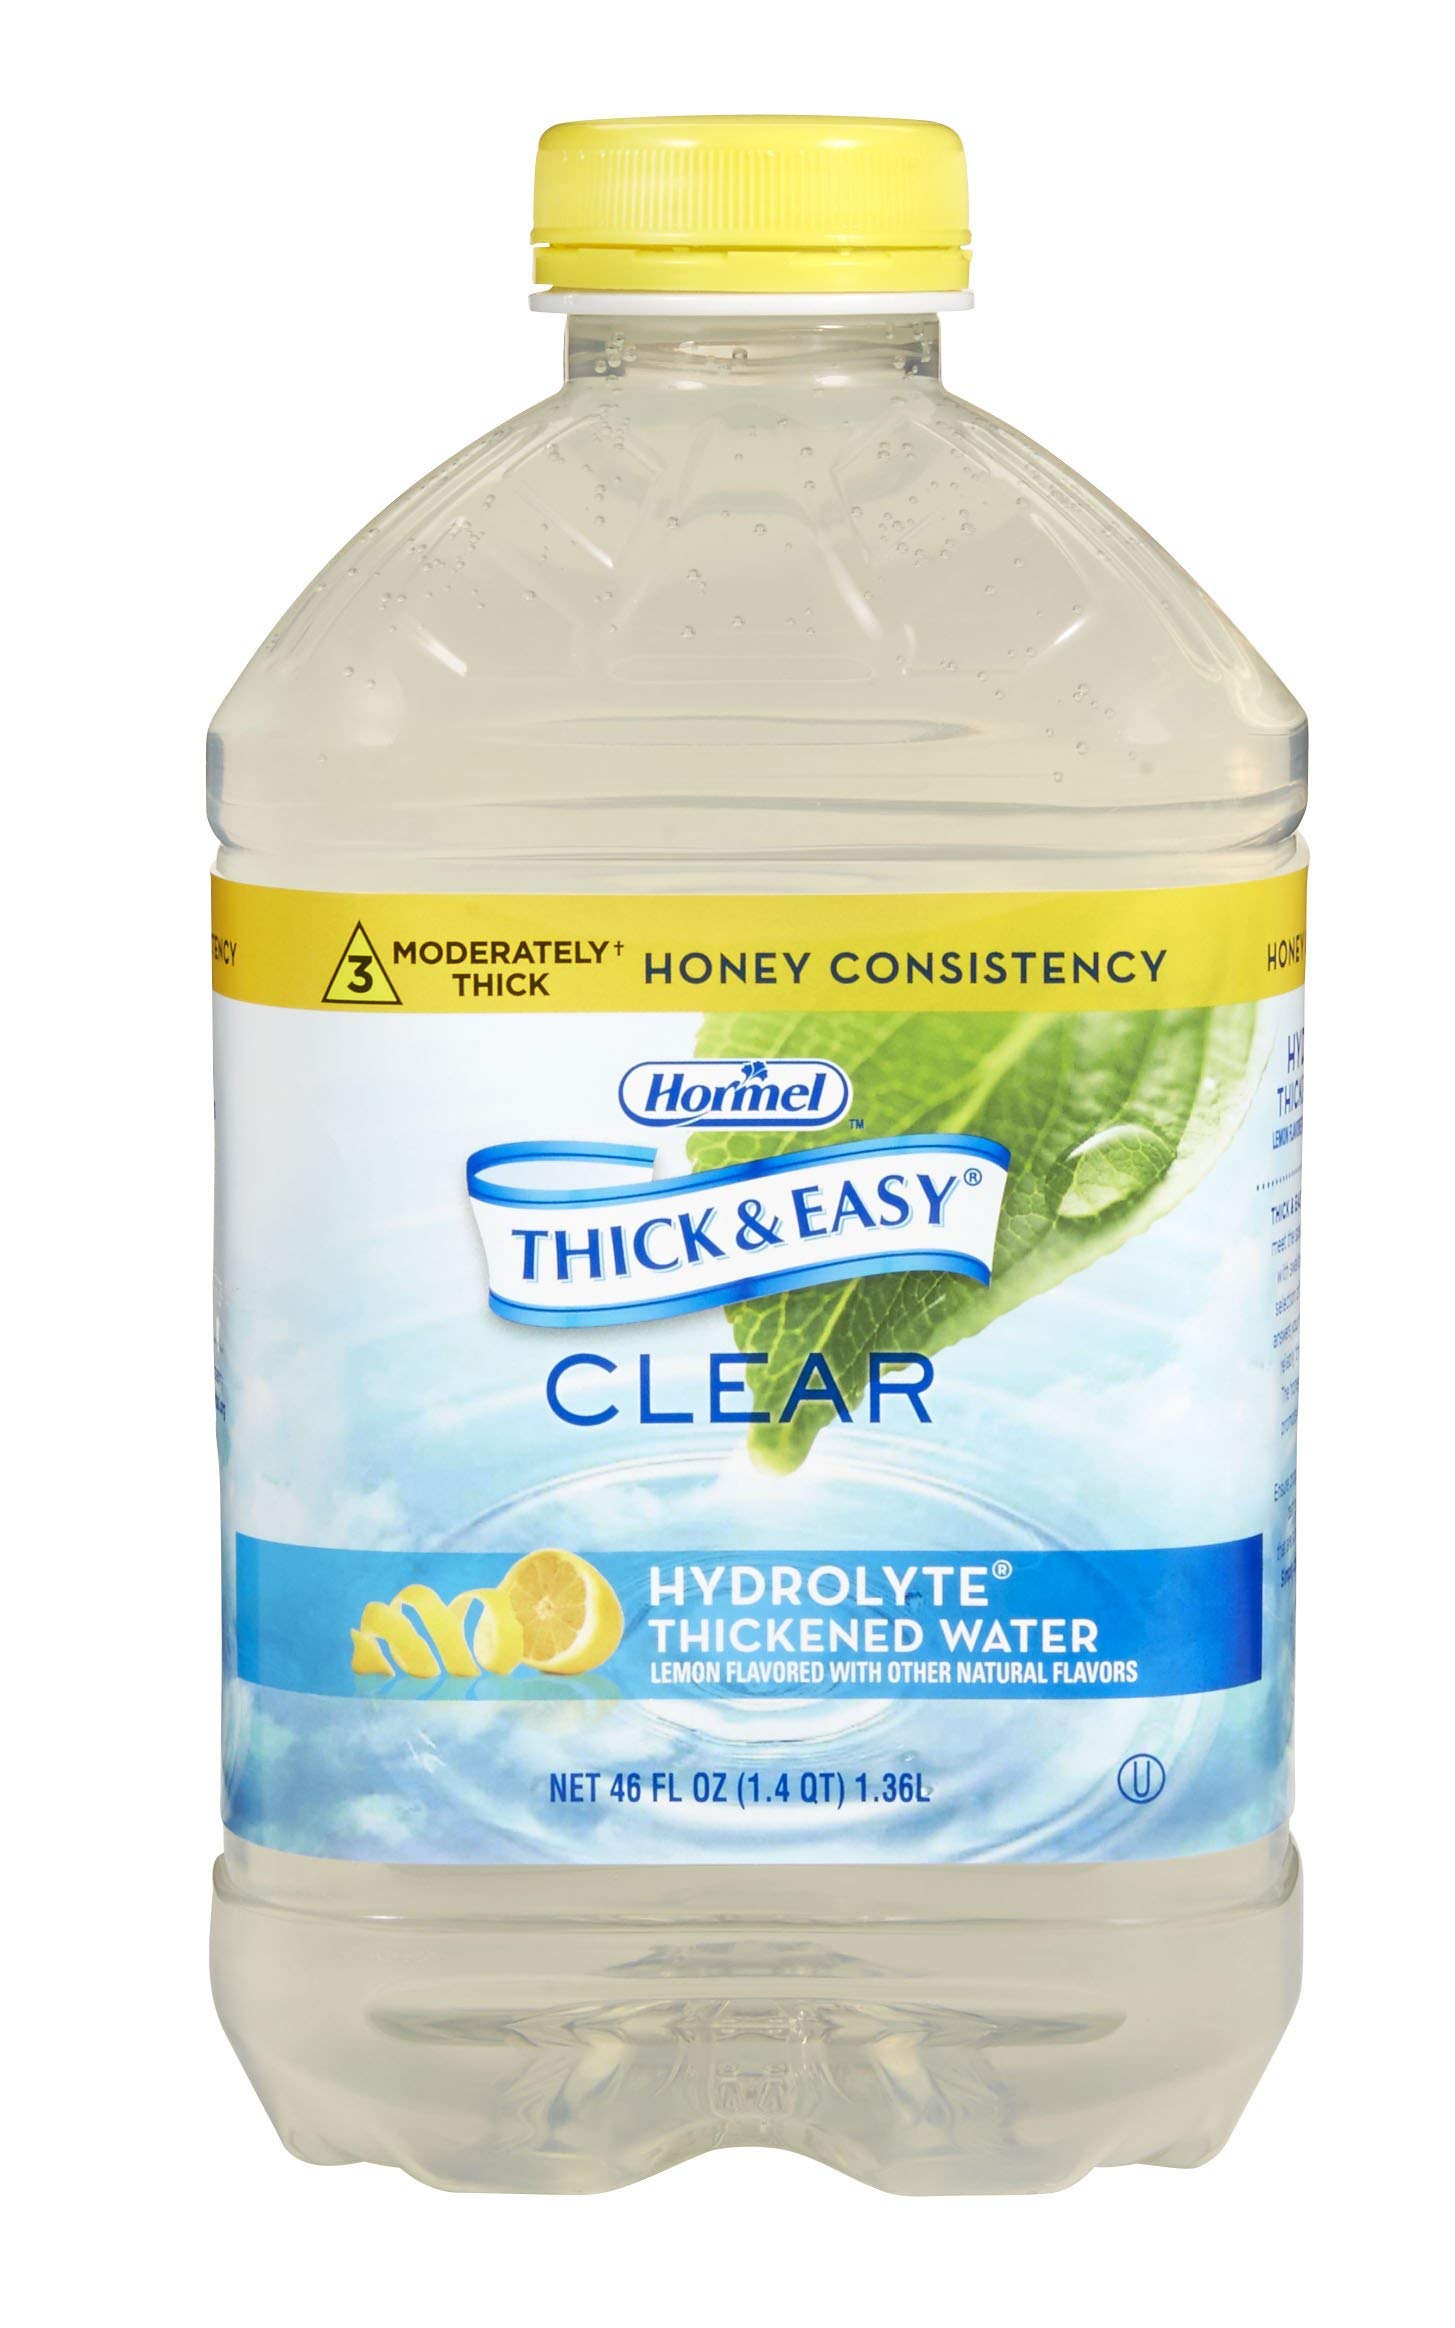 Thick & Easy Hydrolyte Thickened Water 46 oz. Bottle Lemon Flavor Ready to Use Honey Consistency, 27076 - ONE Bottle